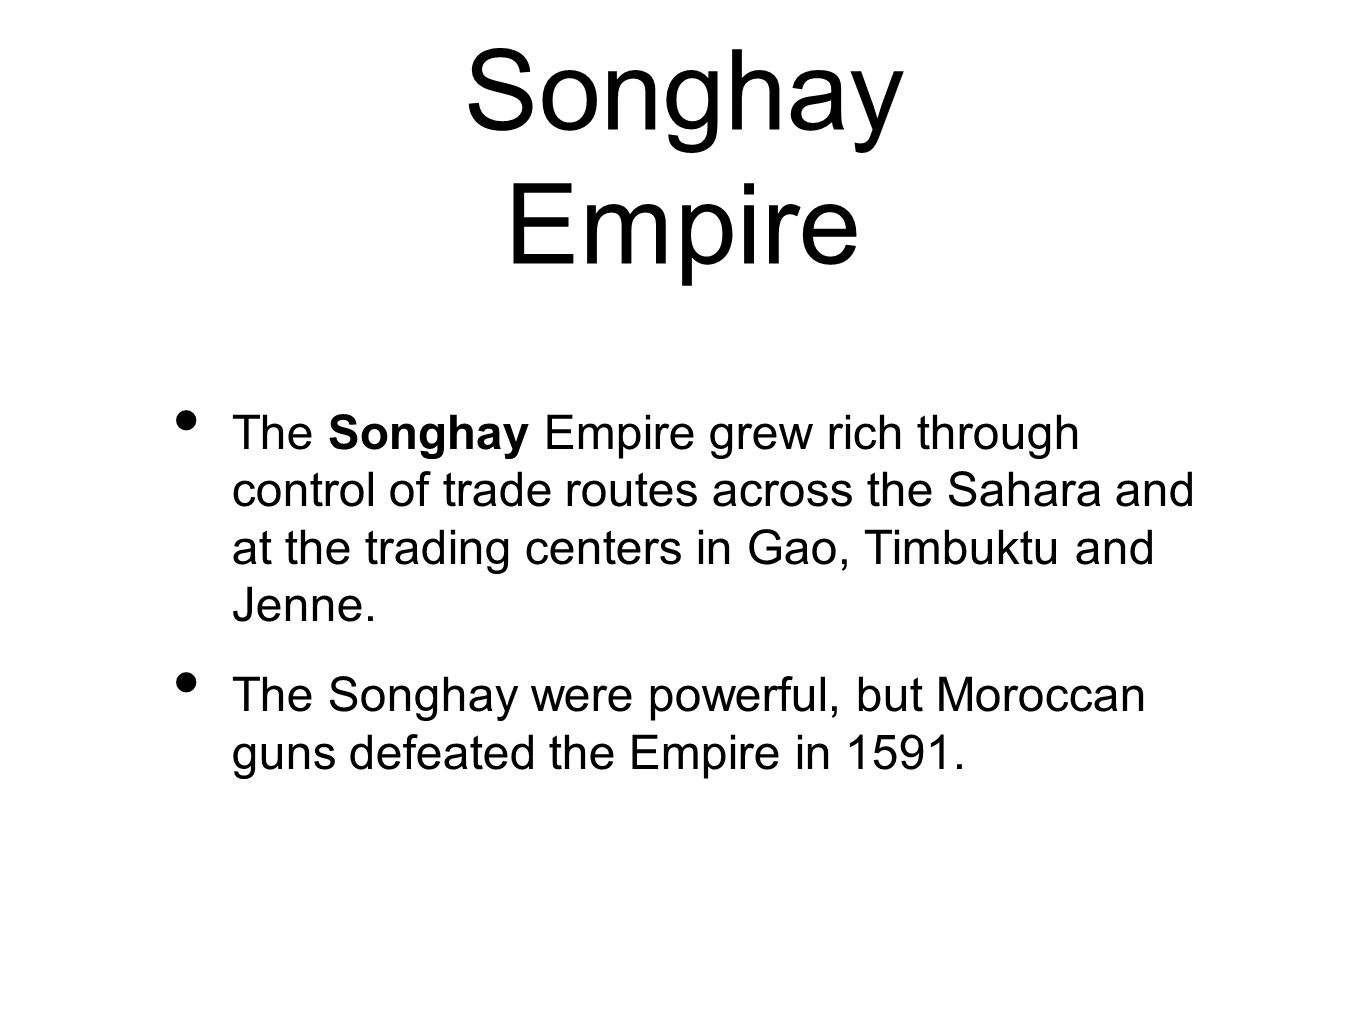 Songhay Empire The Songhay Empire grew rich through control of trade routes across the Sahara and at the trading centers in Gao, Timbuktu and Jenne.